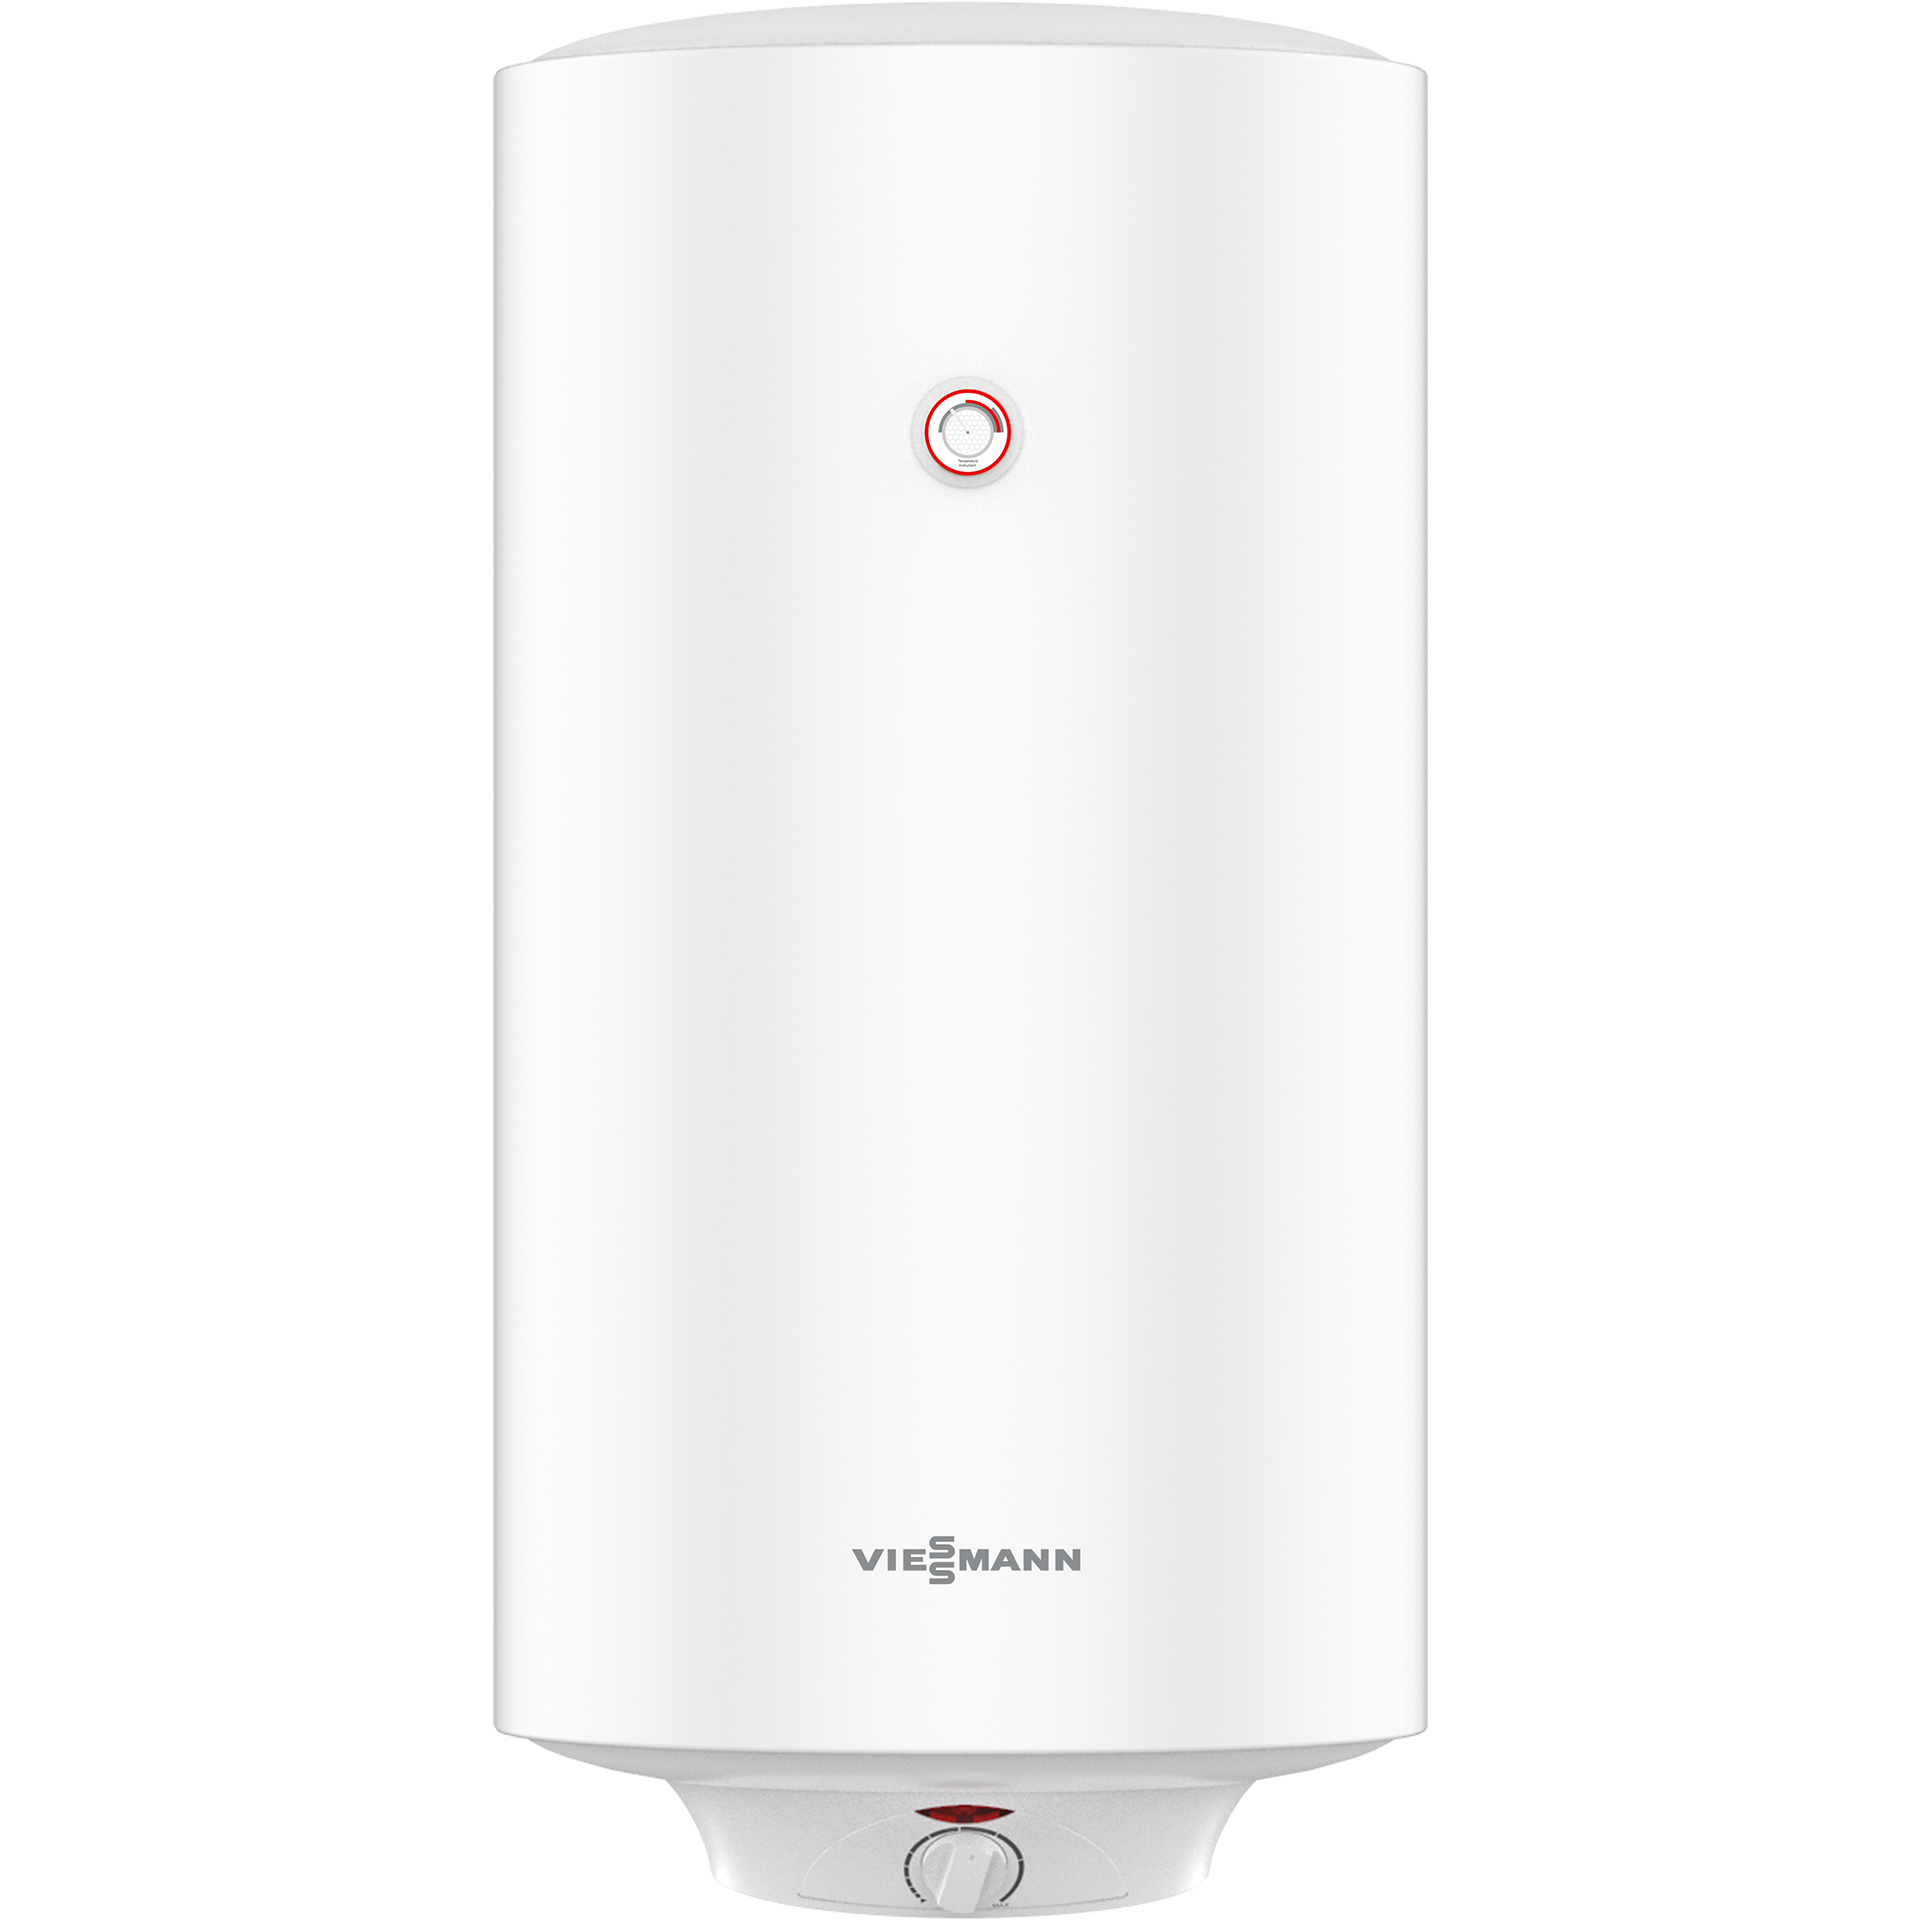 Vitowell comfort cylinder water heaters